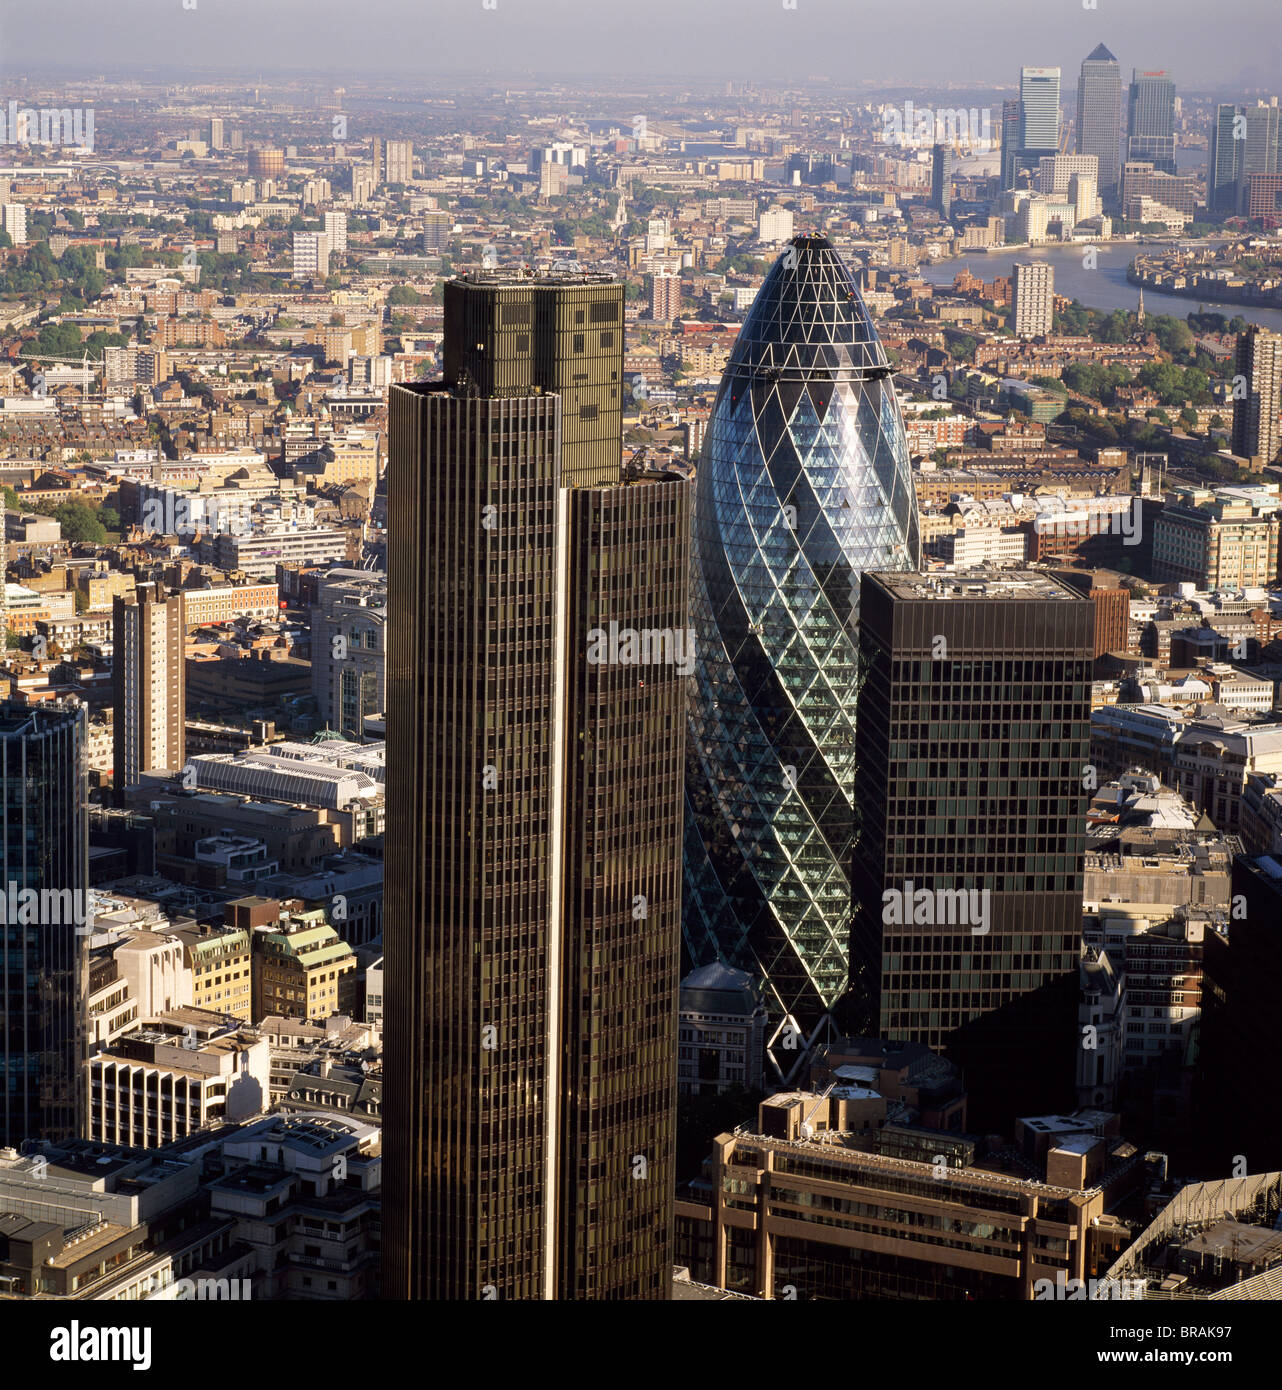 Aerial view of Tower 42, Gherkin (30 St. Mary Axe) (Swiss Re Building) and St. Helen's (Aviva Tower), City of London, London, UK Stock Photo